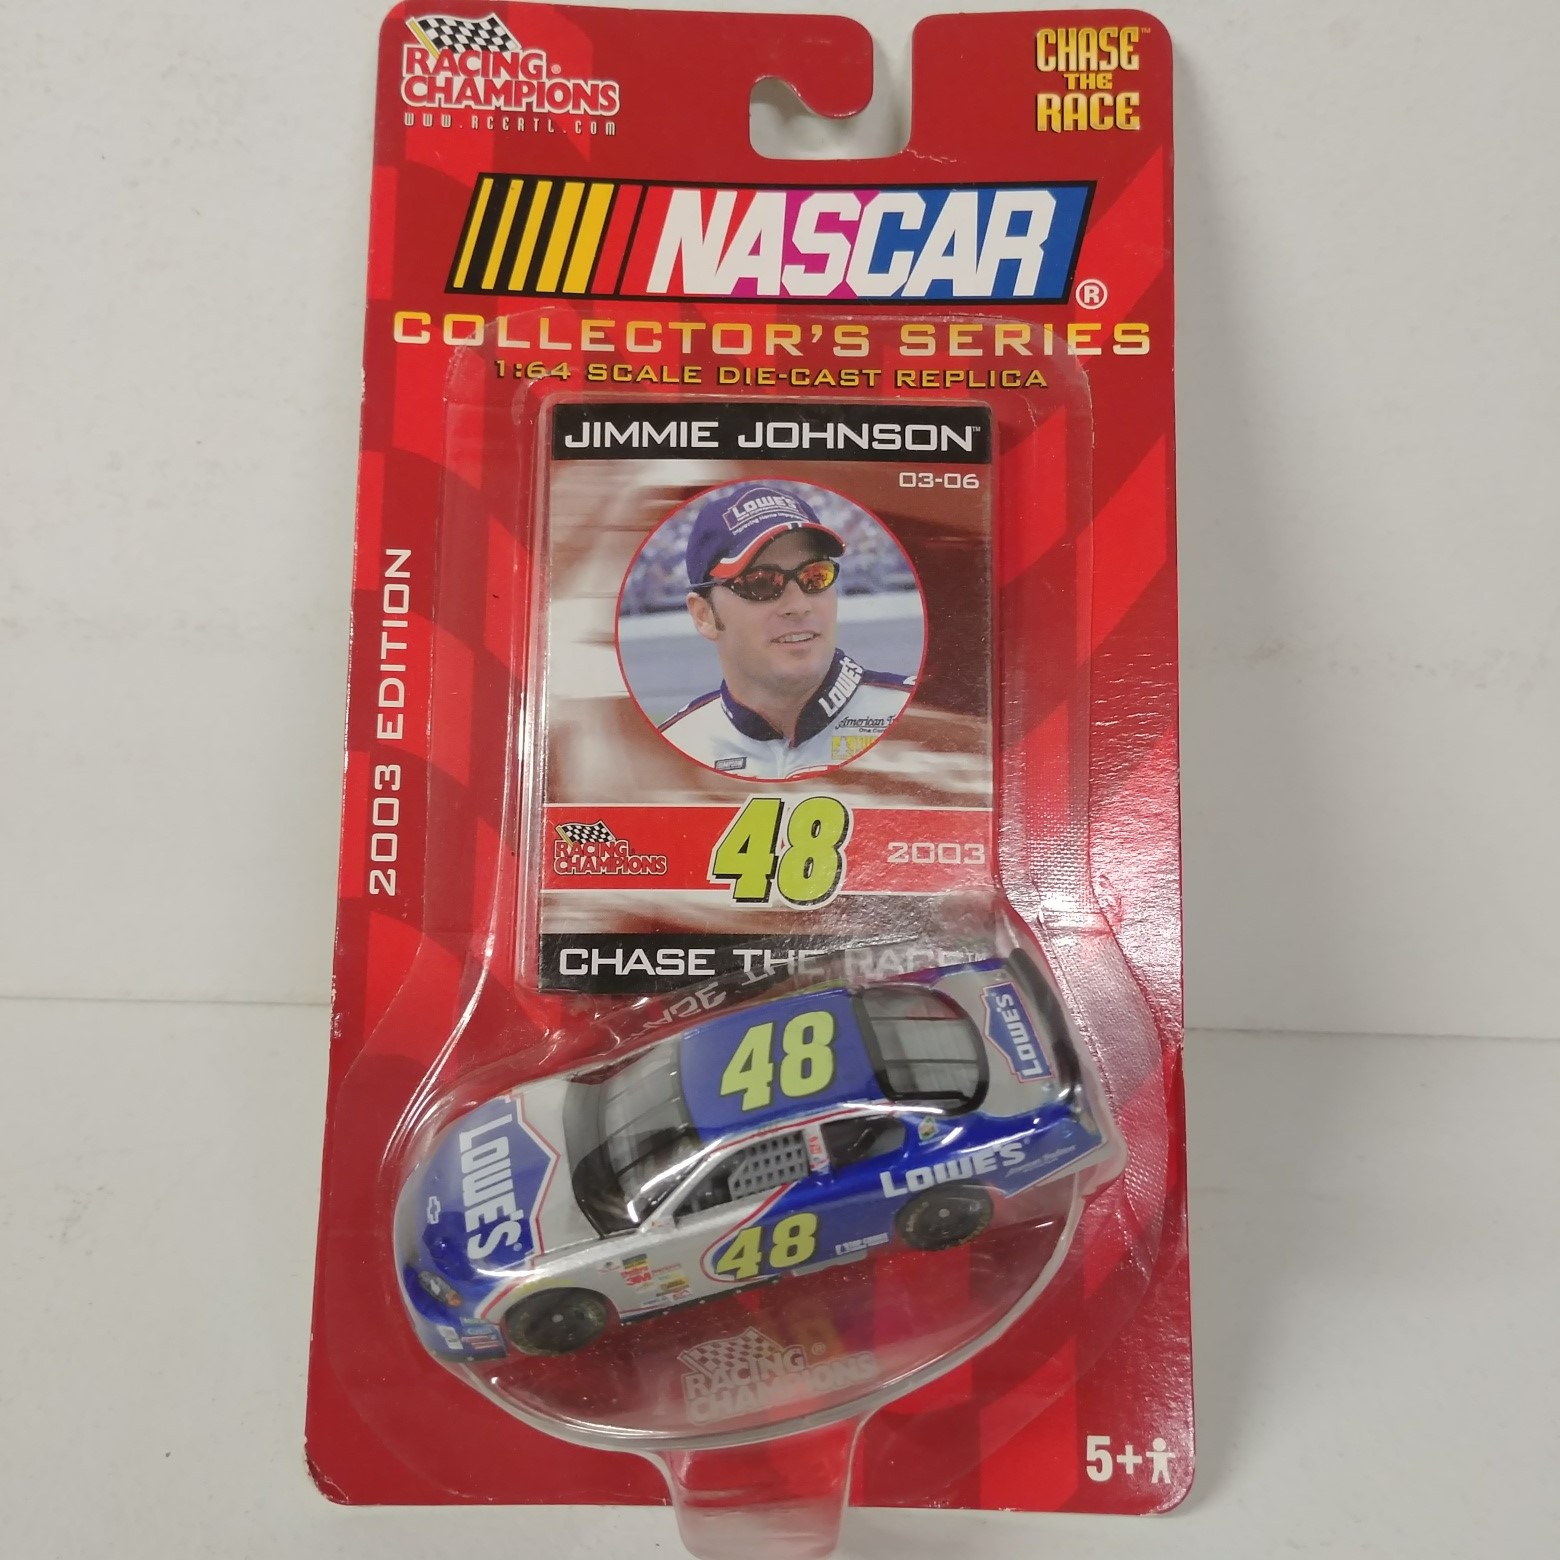 2003 Jimmie Johnson 1/64th Lowe's "Collectors Series""Small Lowe's on quarter panel" car